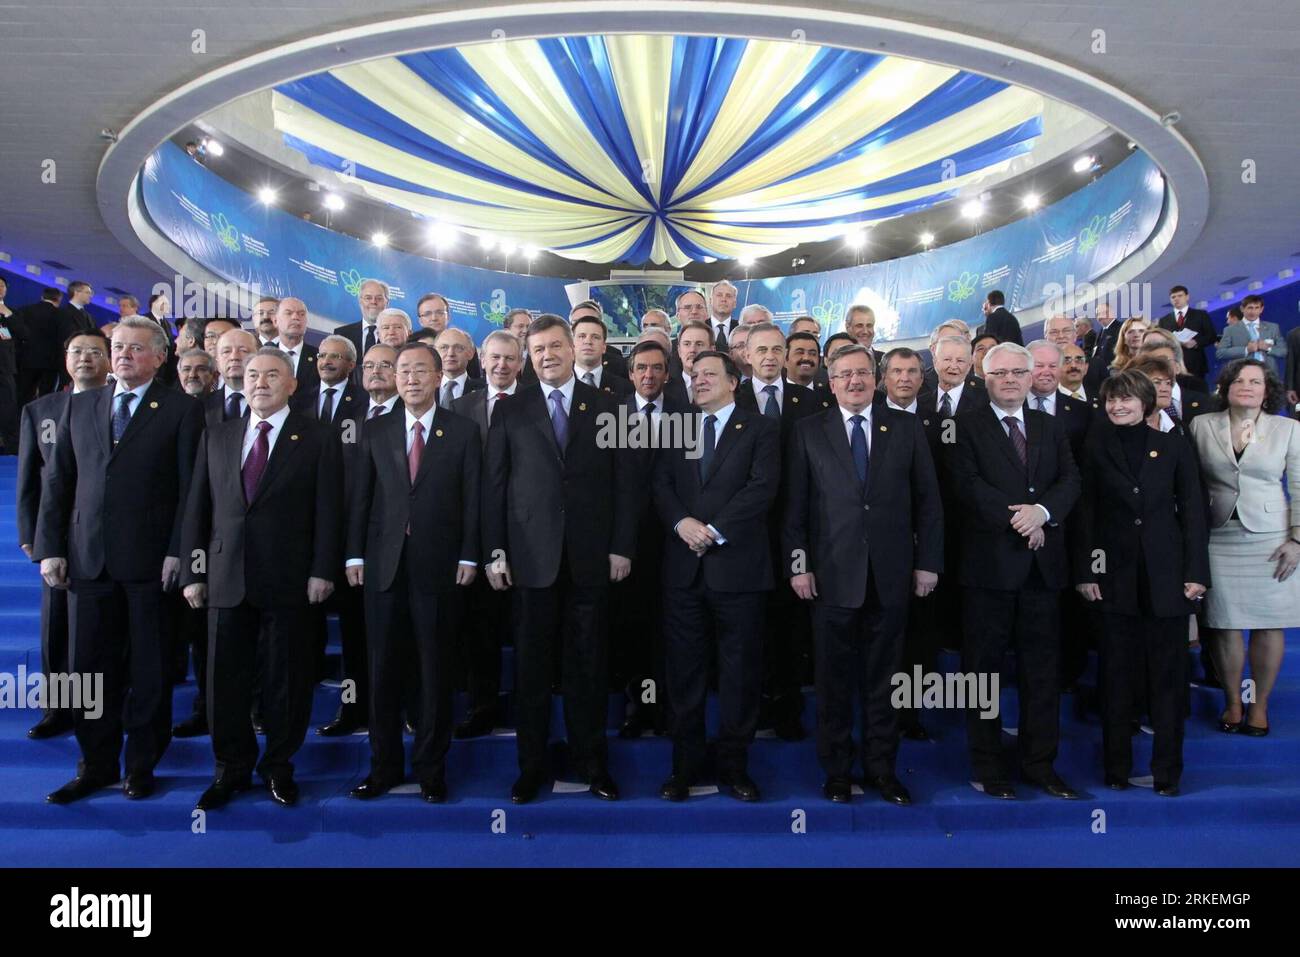 Bildnummer: 55274526  Datum: 19.04.2011  Copyright: imago/Xinhua (110419) -- KIEV, April 19, 2011 (Xinhua) -- Representatives from various nations and areas pose for a family photo during the Kiev Summit on safe and innovative use of nuclear energy in Kiev, capital of Ukraine, April 19, 2011. (Xinhua/Lu Jinbo) (lyi) UKRAINE-KIEV-NUCLEAR-SUMIT PUBLICATIONxNOTxINxCHN Politik People Atomenergie Tschernobylkonferenz Konferenz atomare Sicherheit kbdig xub 2011 quer premiumd     Bildnummer 55274526 Date 19 04 2011 Copyright Imago XINHUA  Kiev April 19 2011 XINHUA Representatives from Various Nations Stock Photo